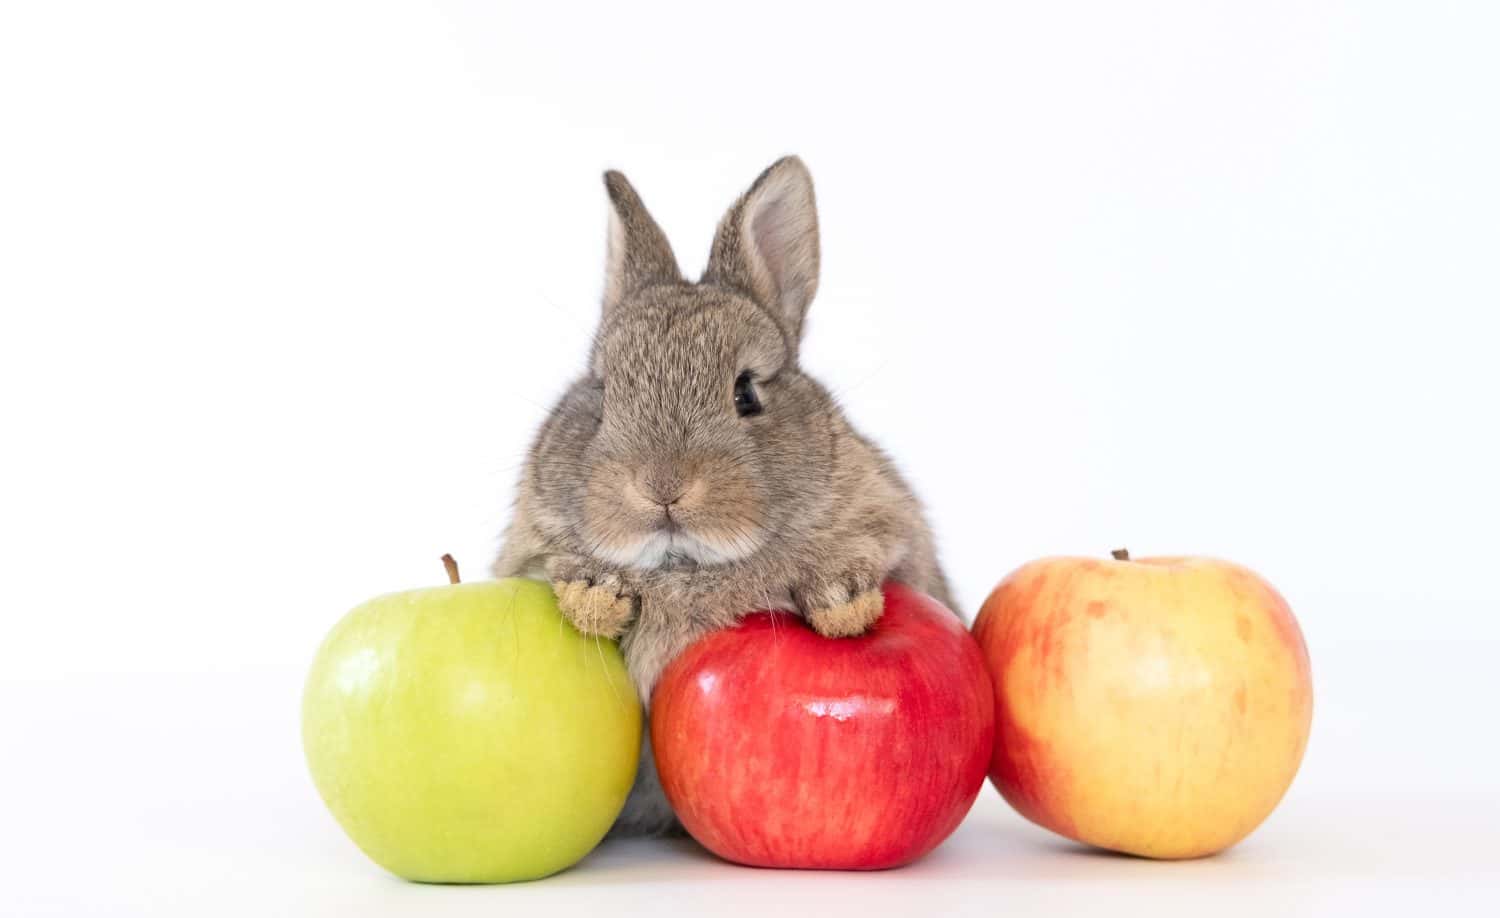 Adorable Lovely bunny rabbit with red apples on white background, Animal food concept